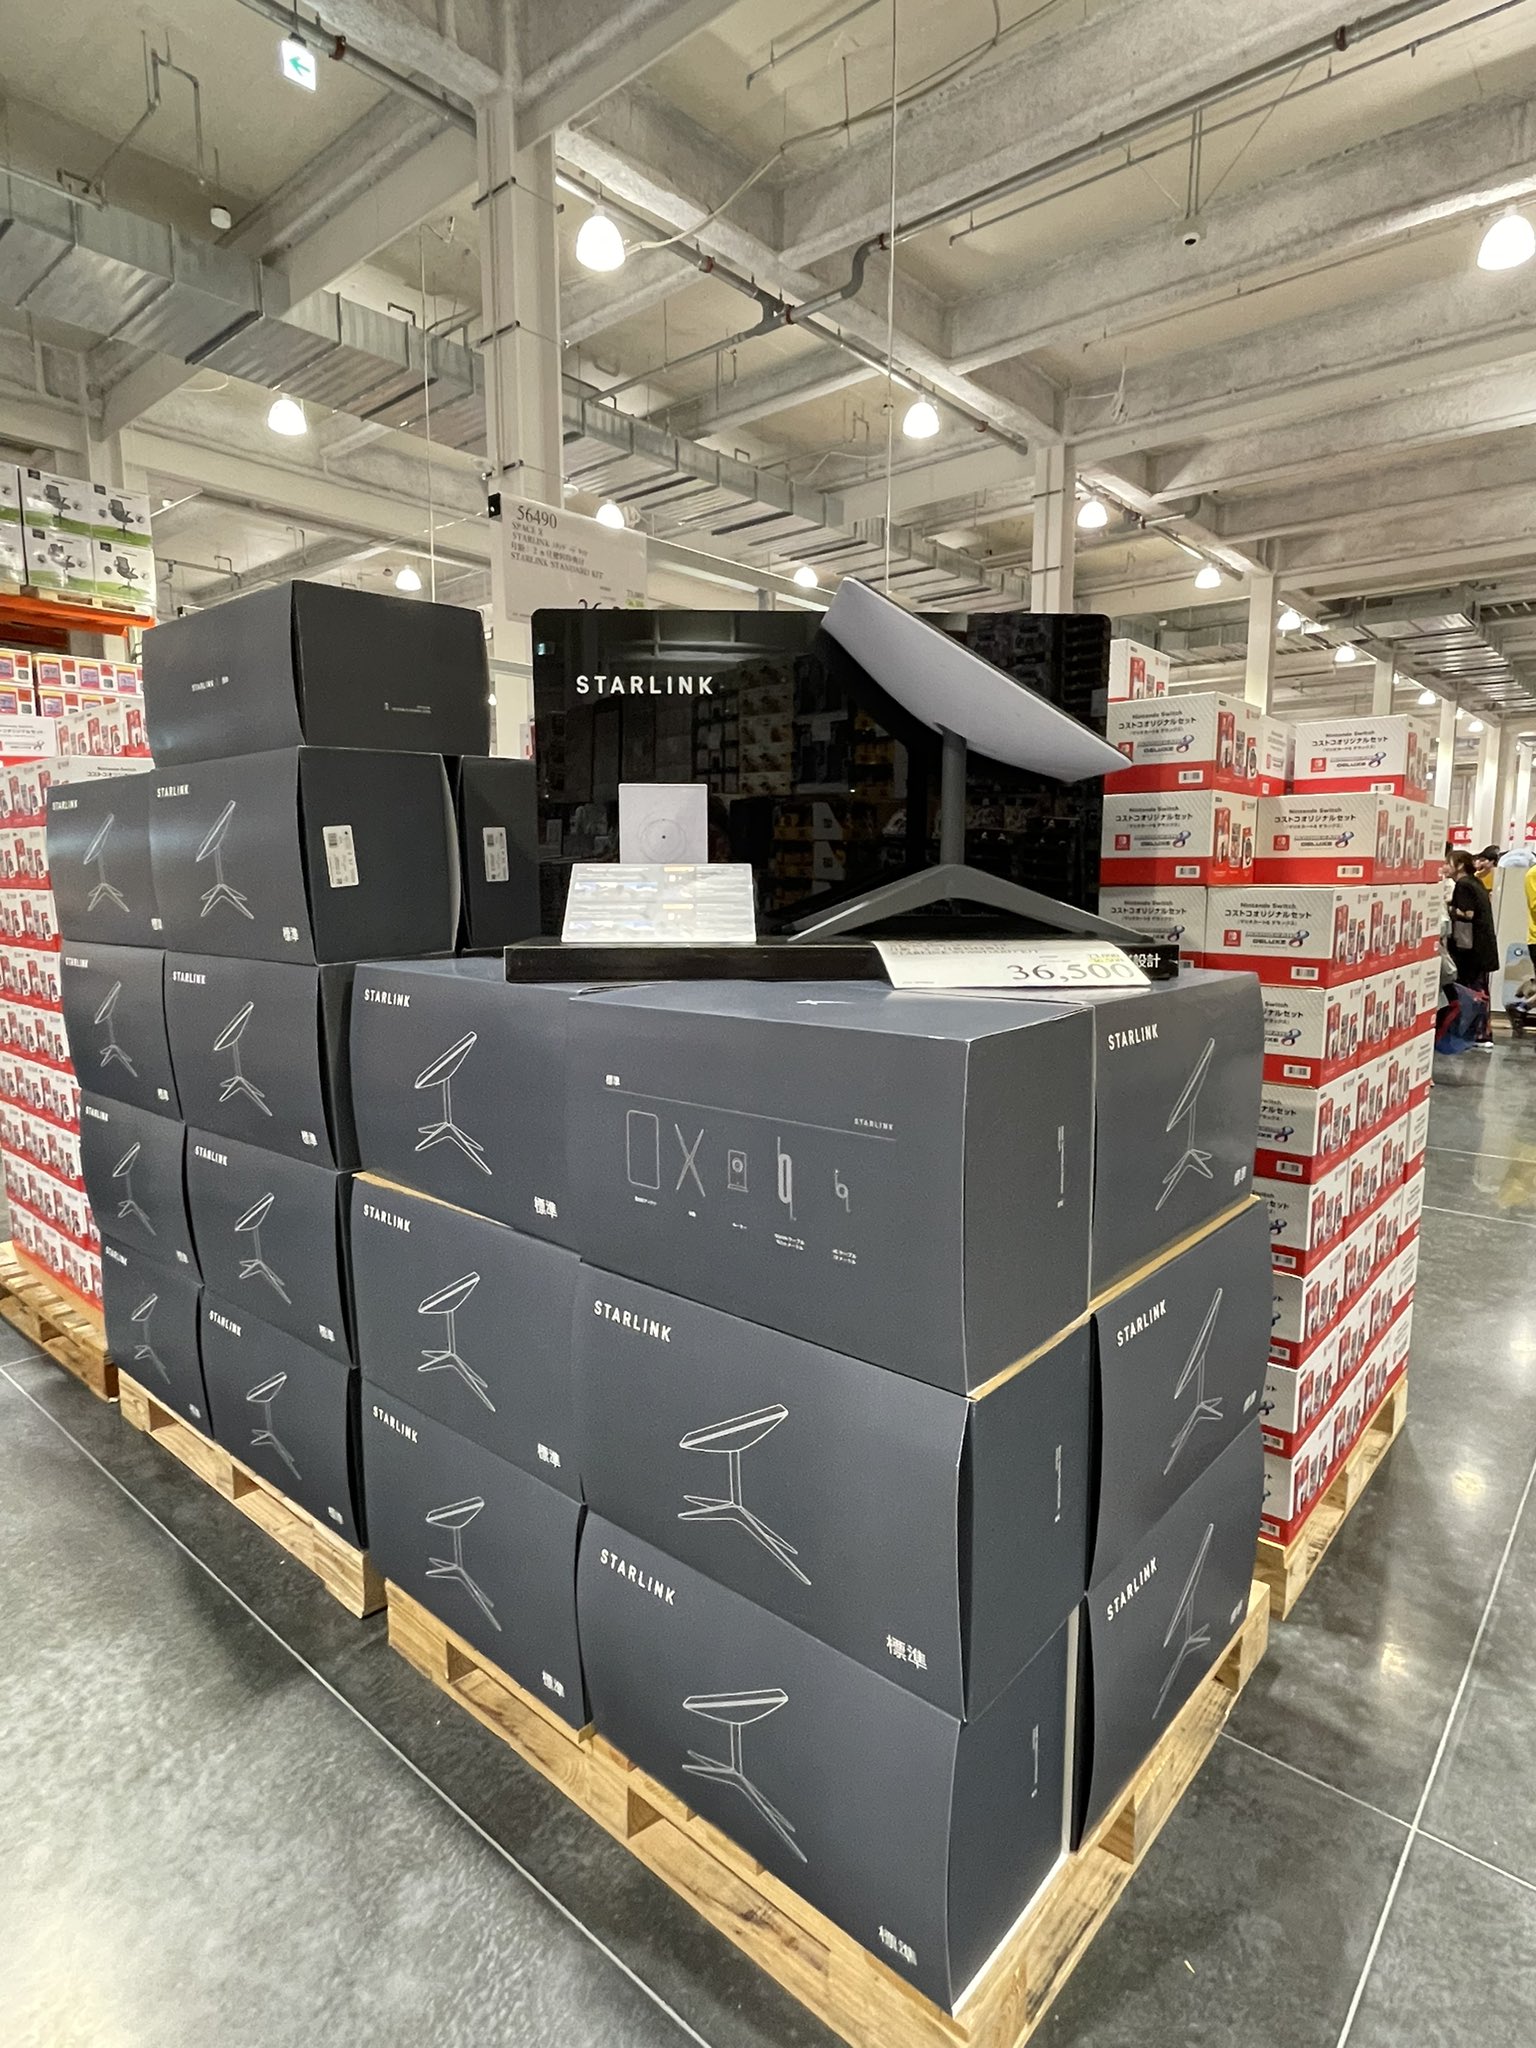 SpaceX starts selling Starlink kits at Costco in Japan - Drive Tesla